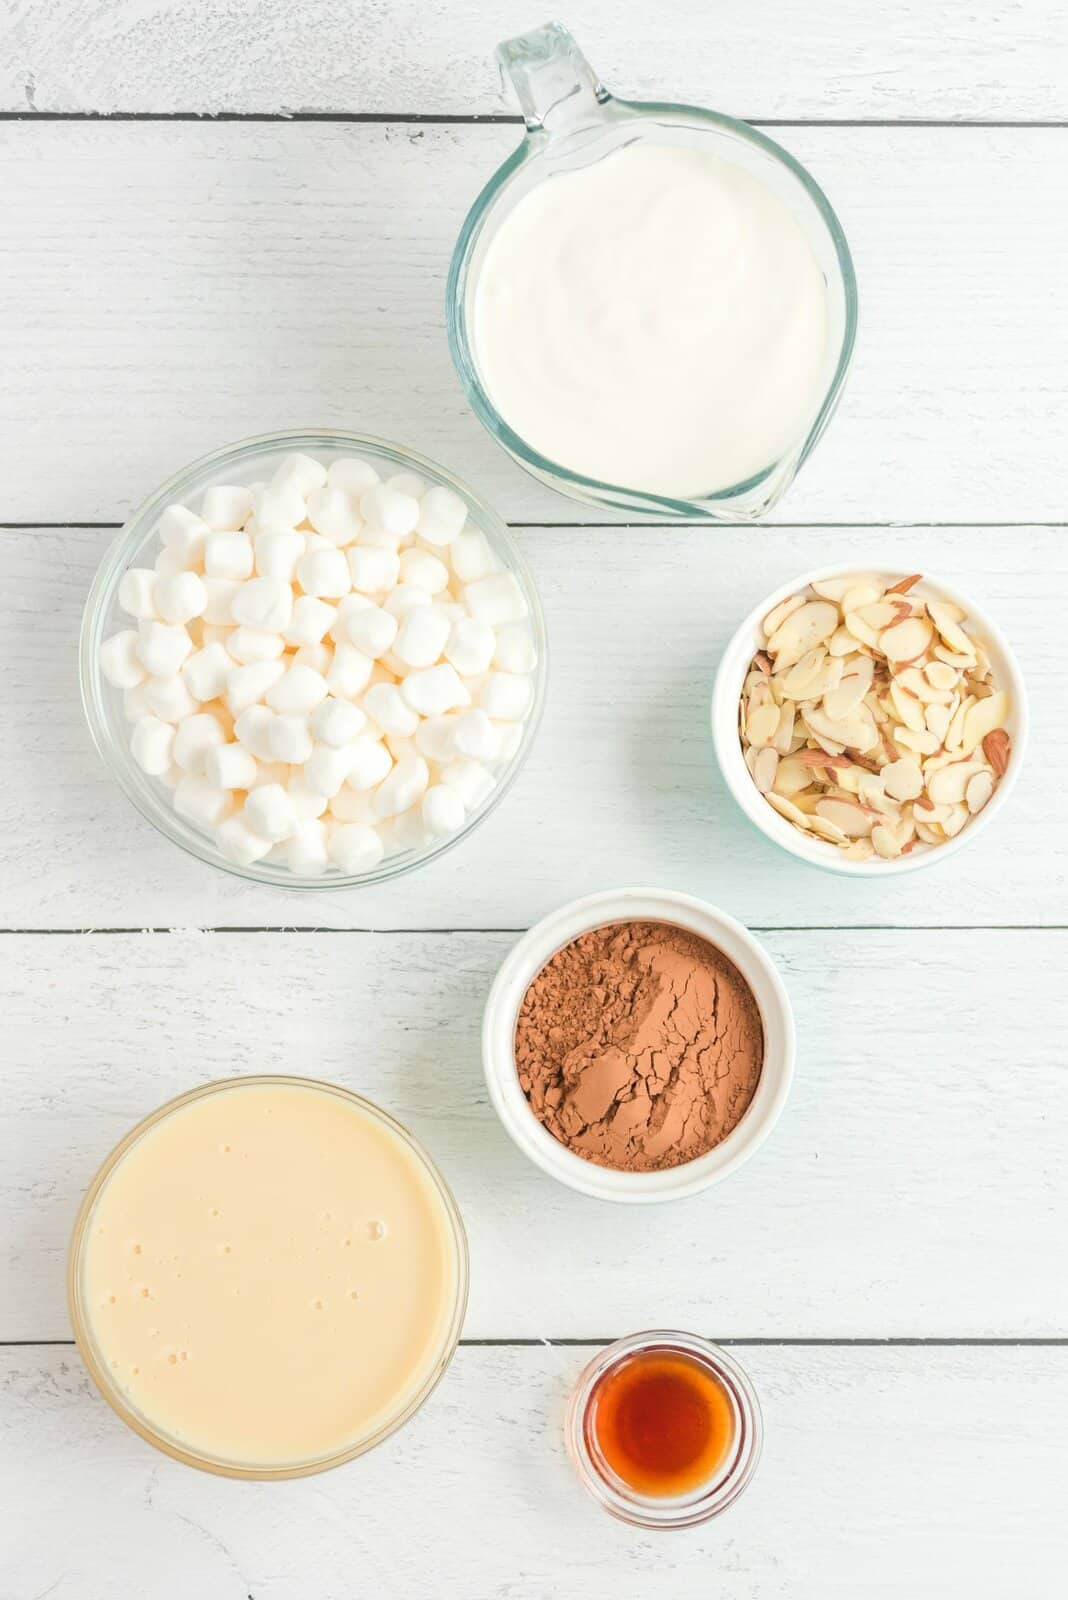 Ingredients needed: heavy whipping cream, sweetened condensed milk, pure vanilla extract, cocoa powder, mini marshmallows and sliced ​​almonds.